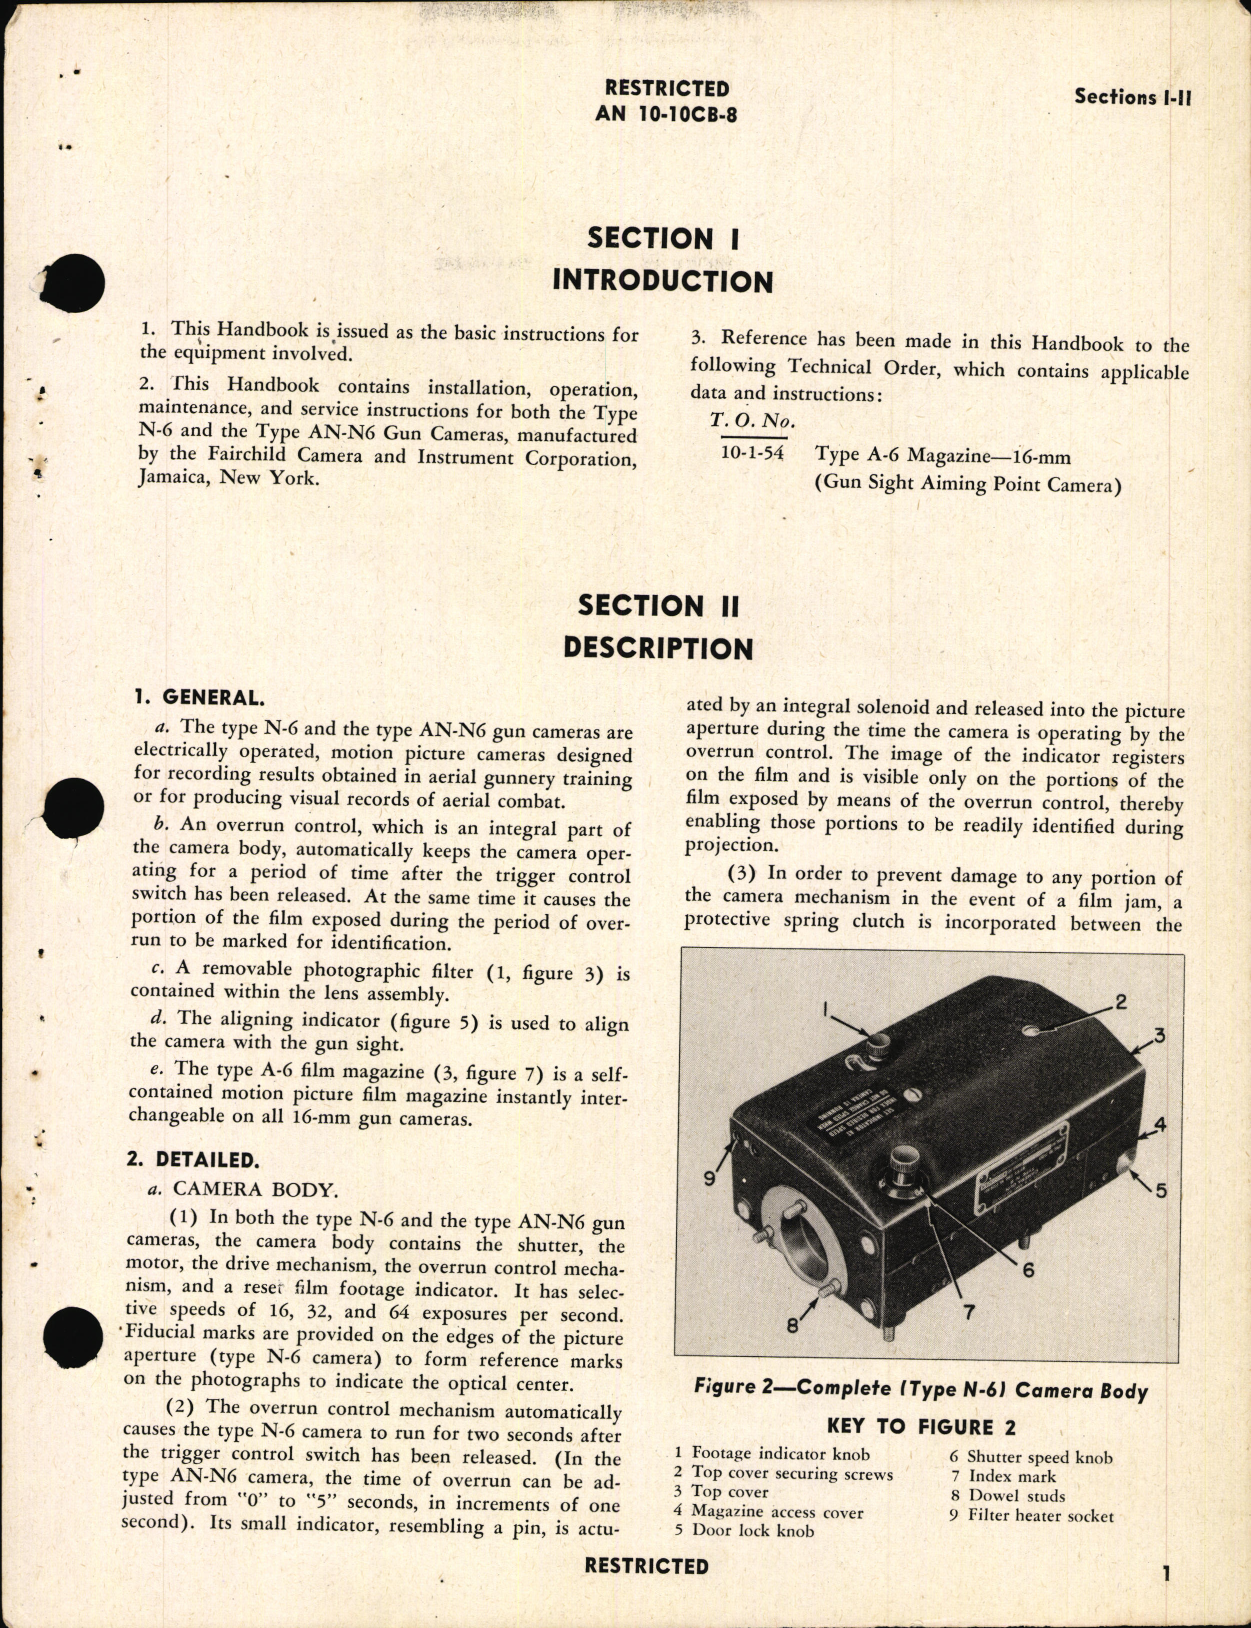 Sample page 5 from AirCorps Library document: Handbook of Instructions with Parts Catalog for N-6 and AN-N6 Gun Cameras